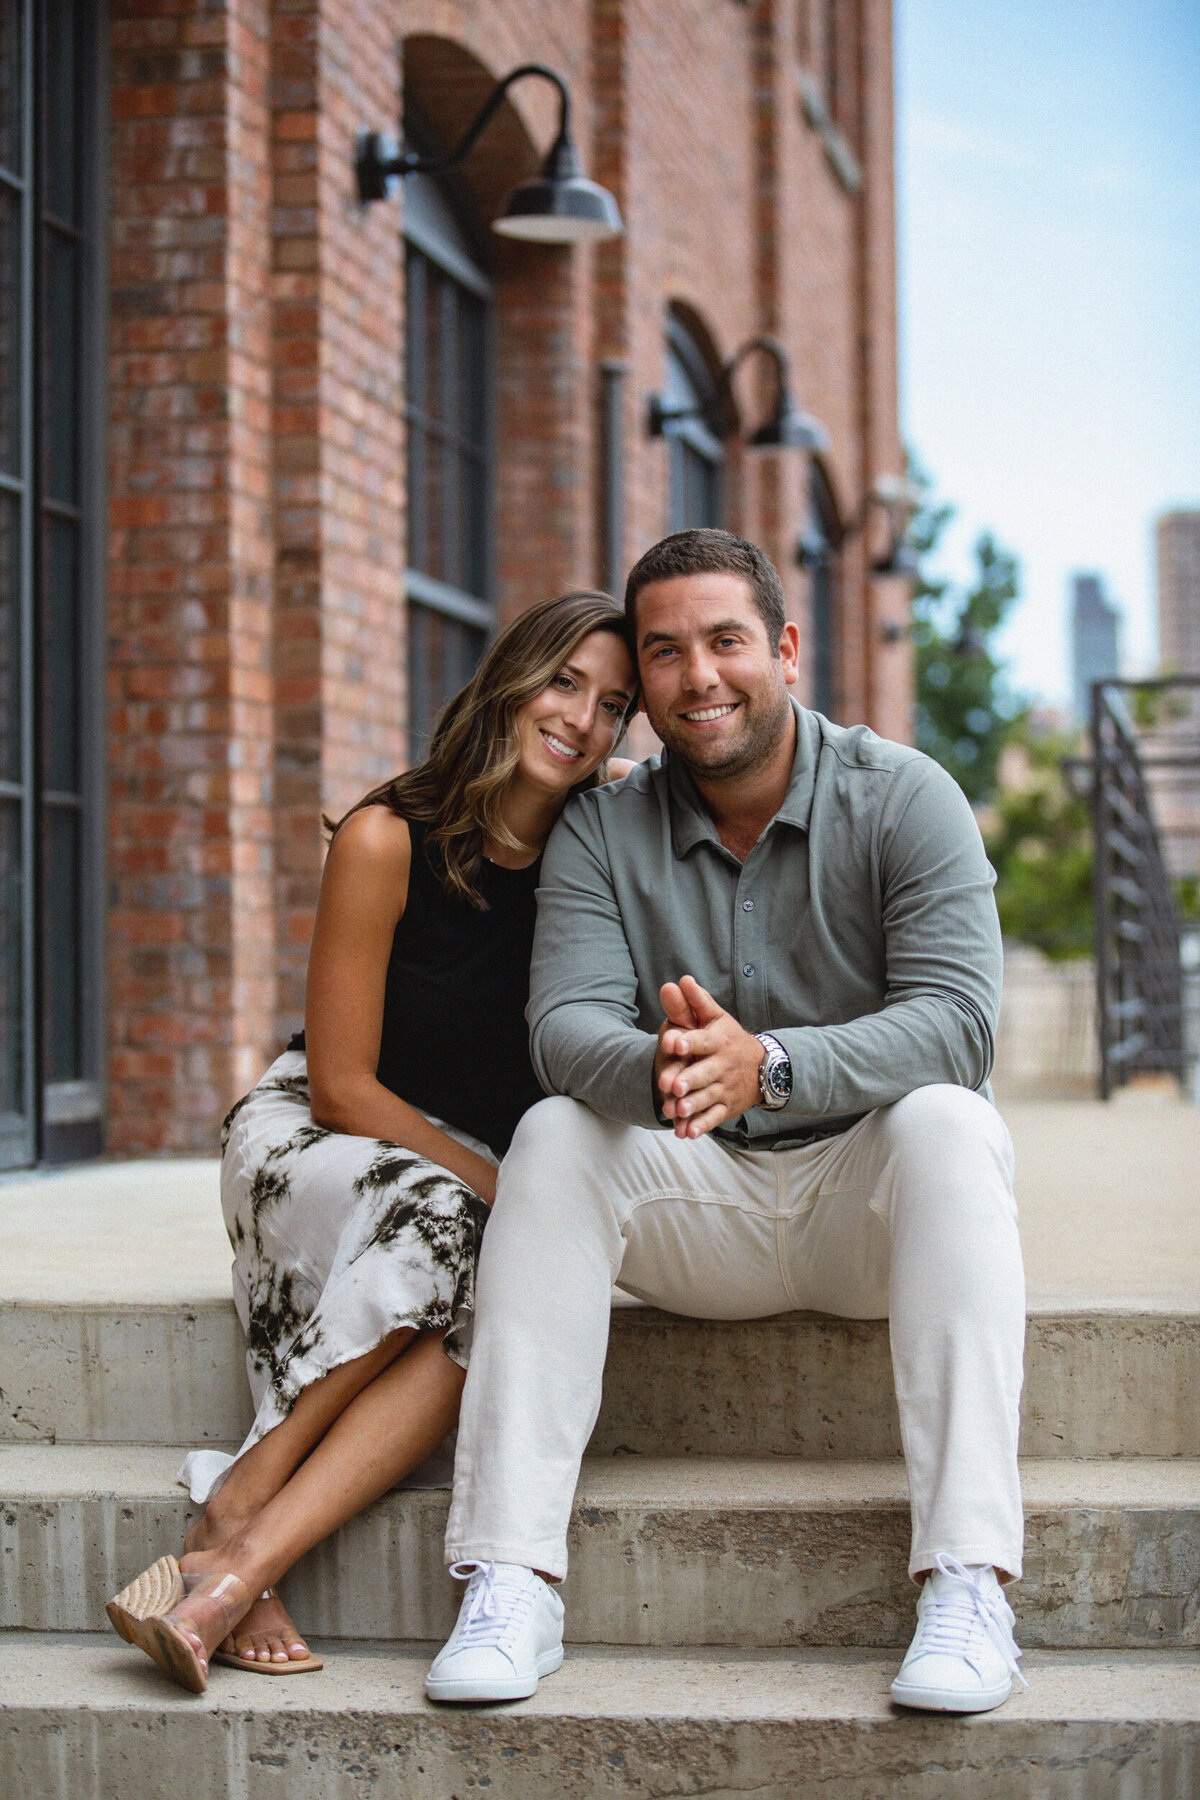 Danny_Weiss_Studio_New_York_City_Engagement_Photography_0067